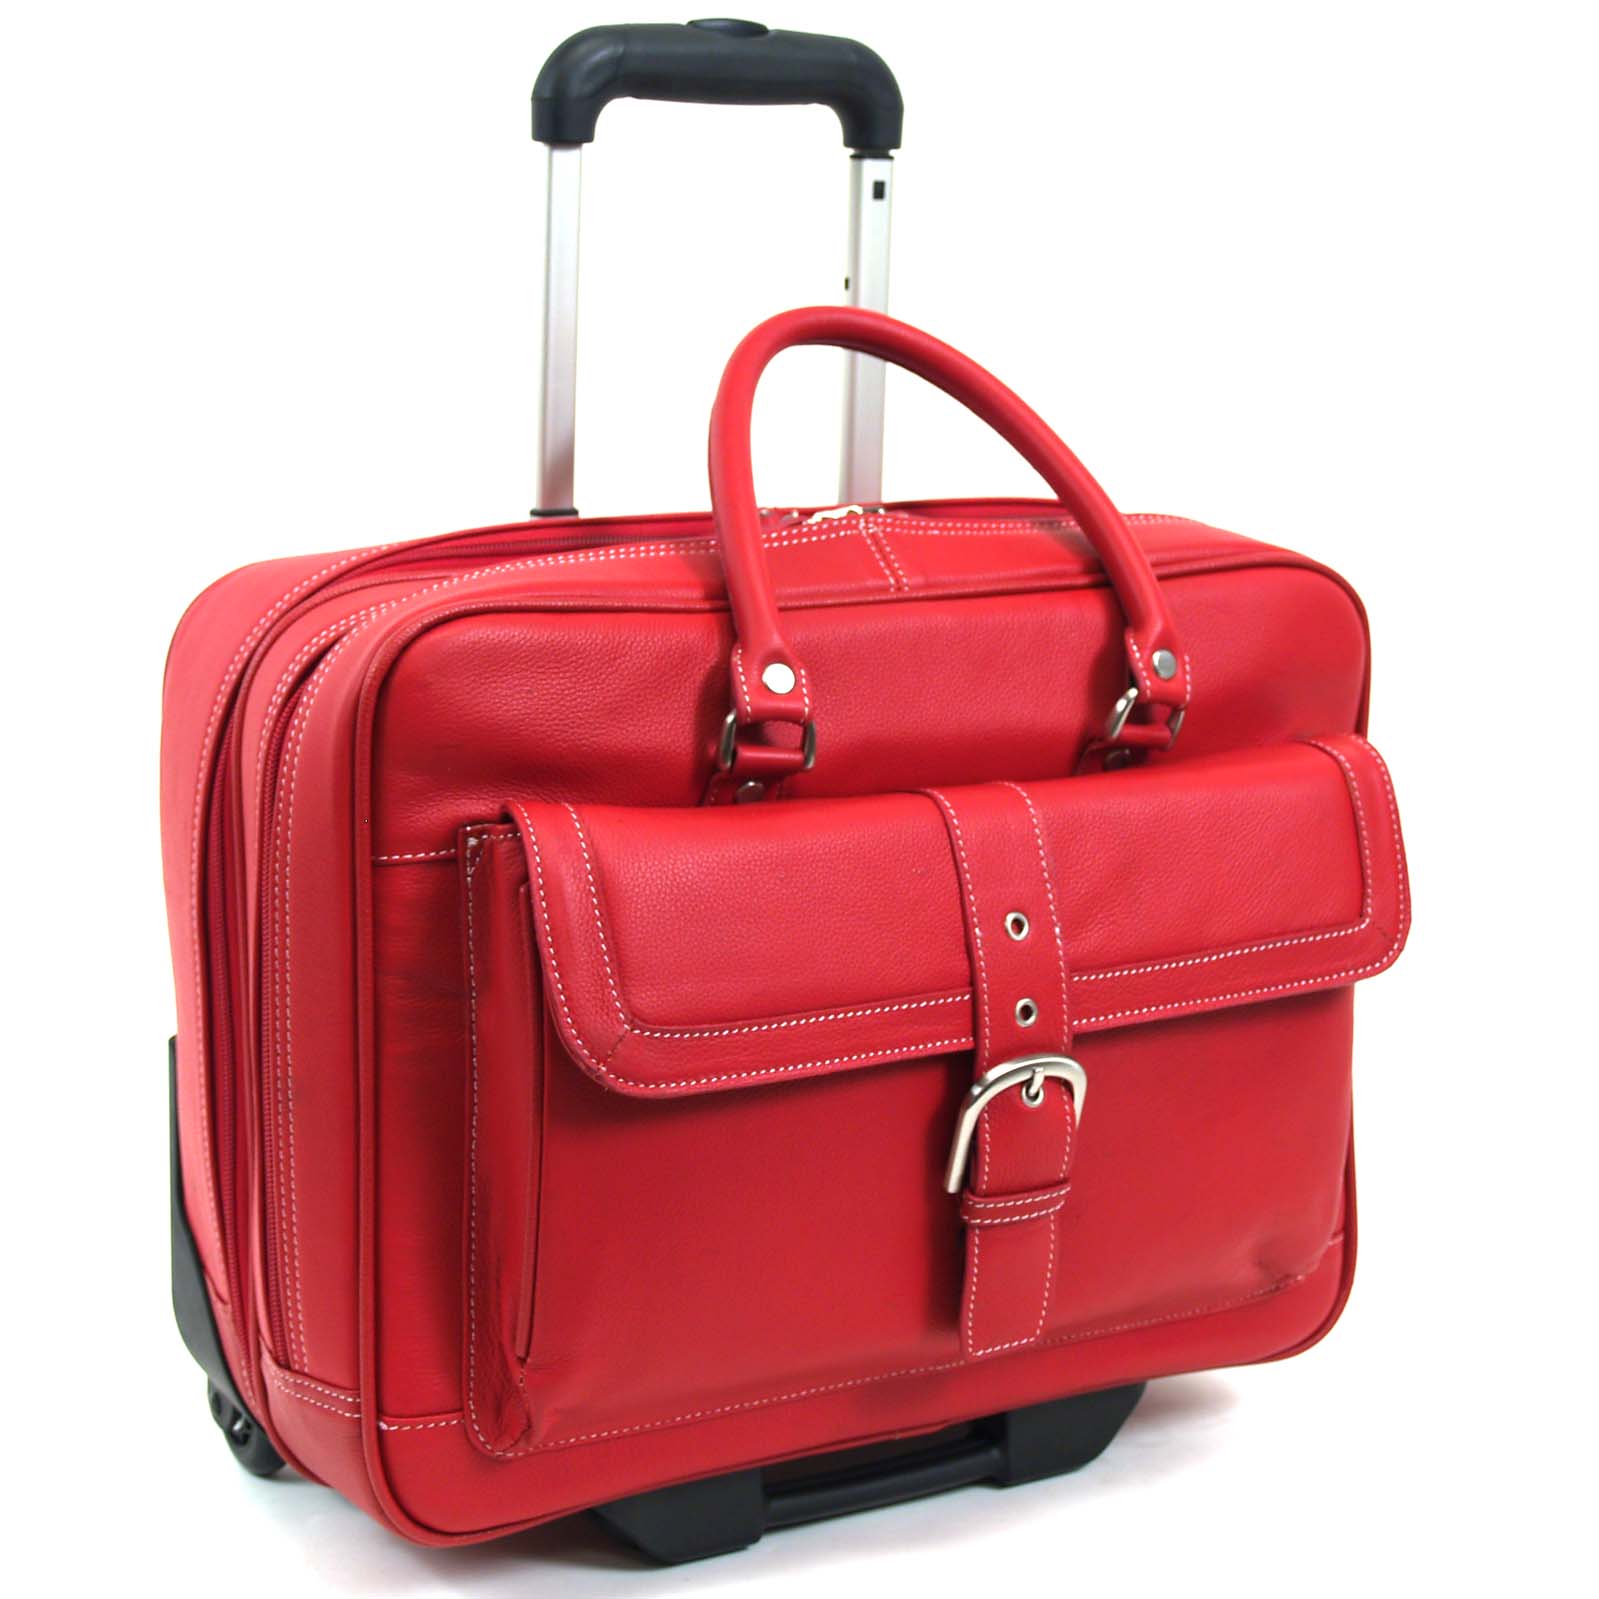 Heritage Soho Barn Red Leather 15.6-inch Double-compartment Top-zip Rolling Laptop Case